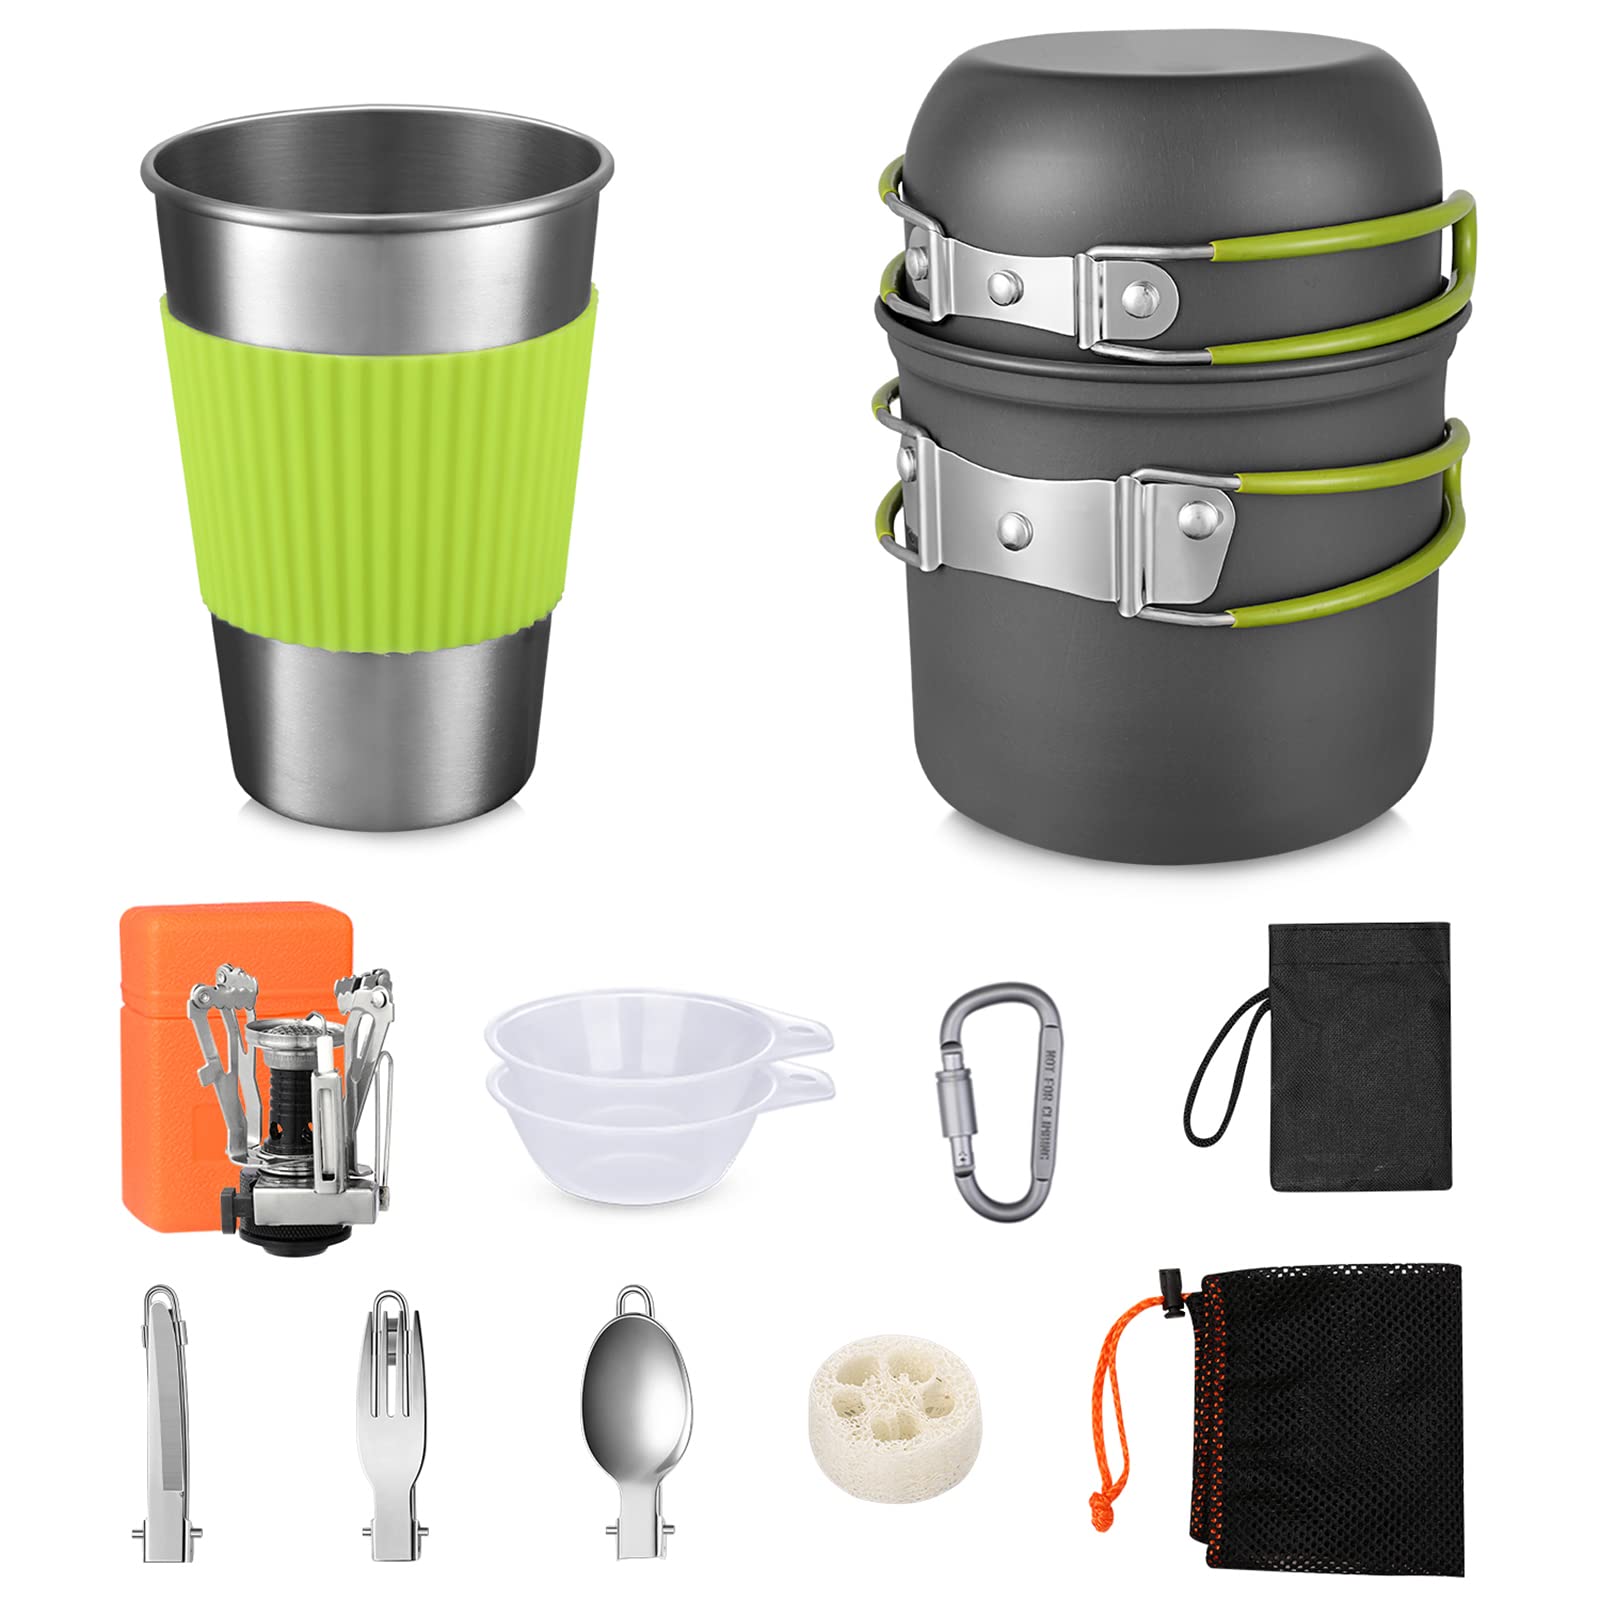 Camping Gear, Camping Cooking Set, 21pcs Camping Accessories